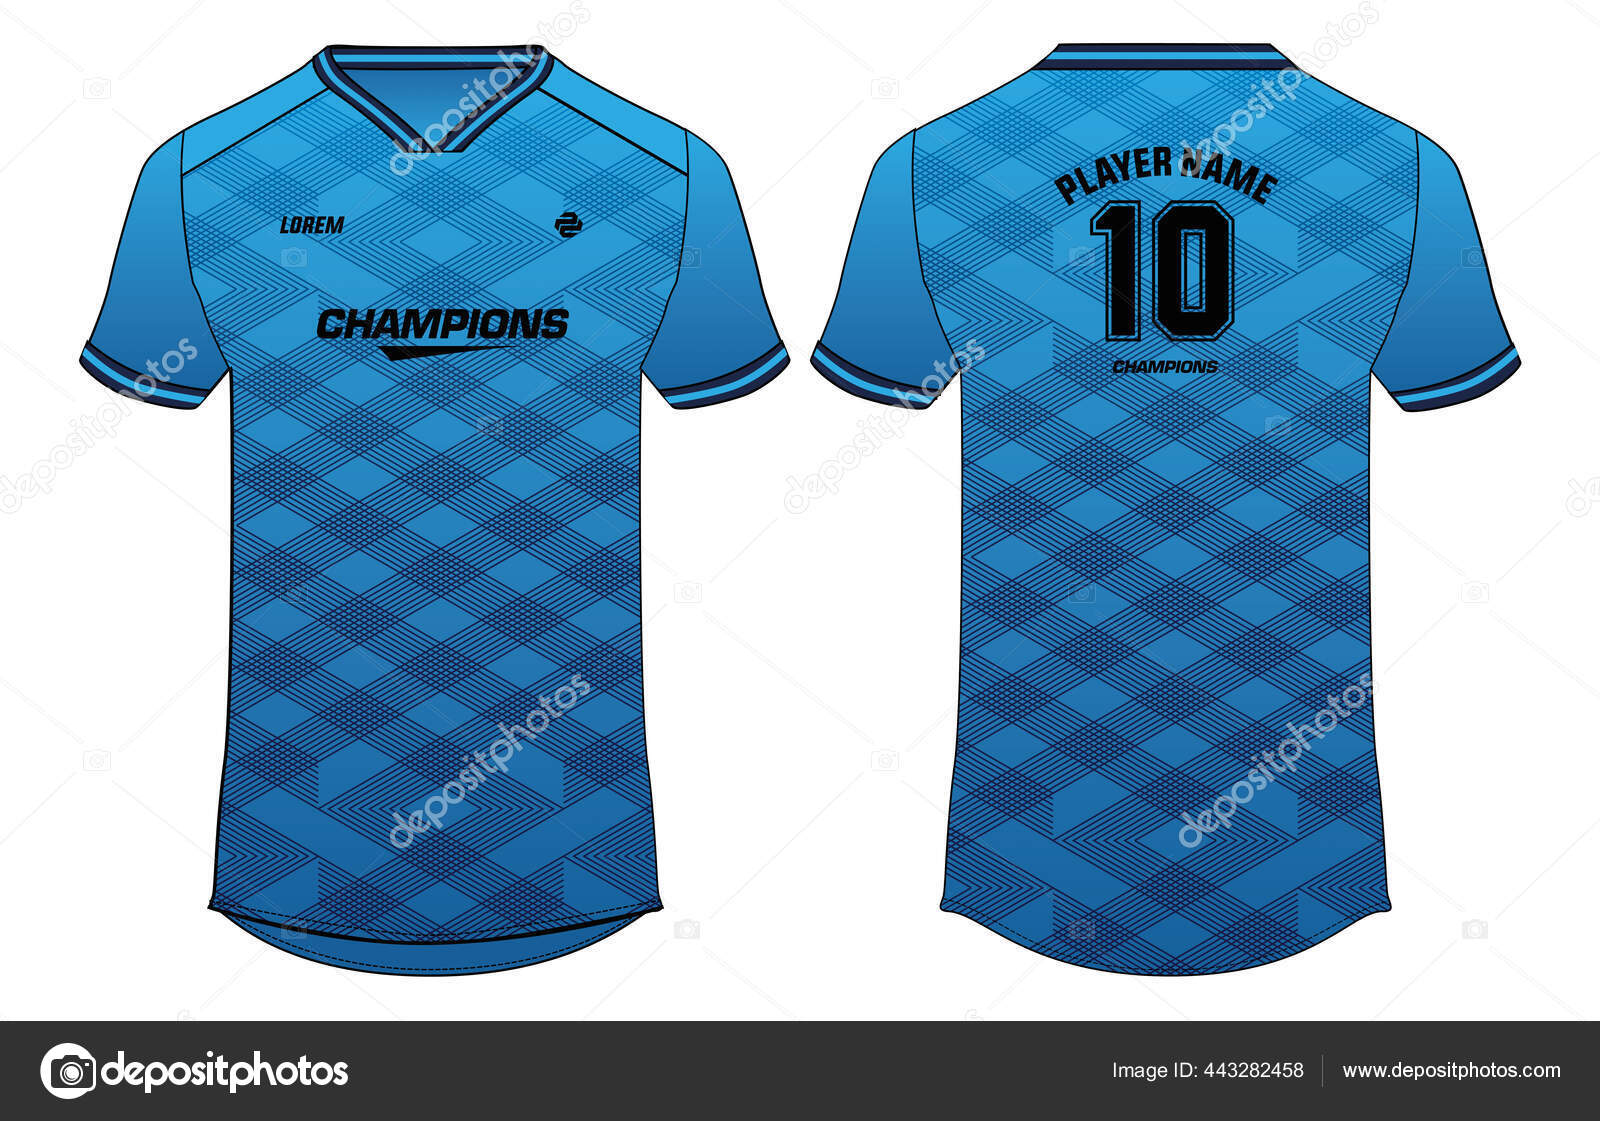 Download Sports Jersey Shirt Design Concept Vector Template Sports Jersey Concept Vector Image By C Faalil Vector Stock 443282458